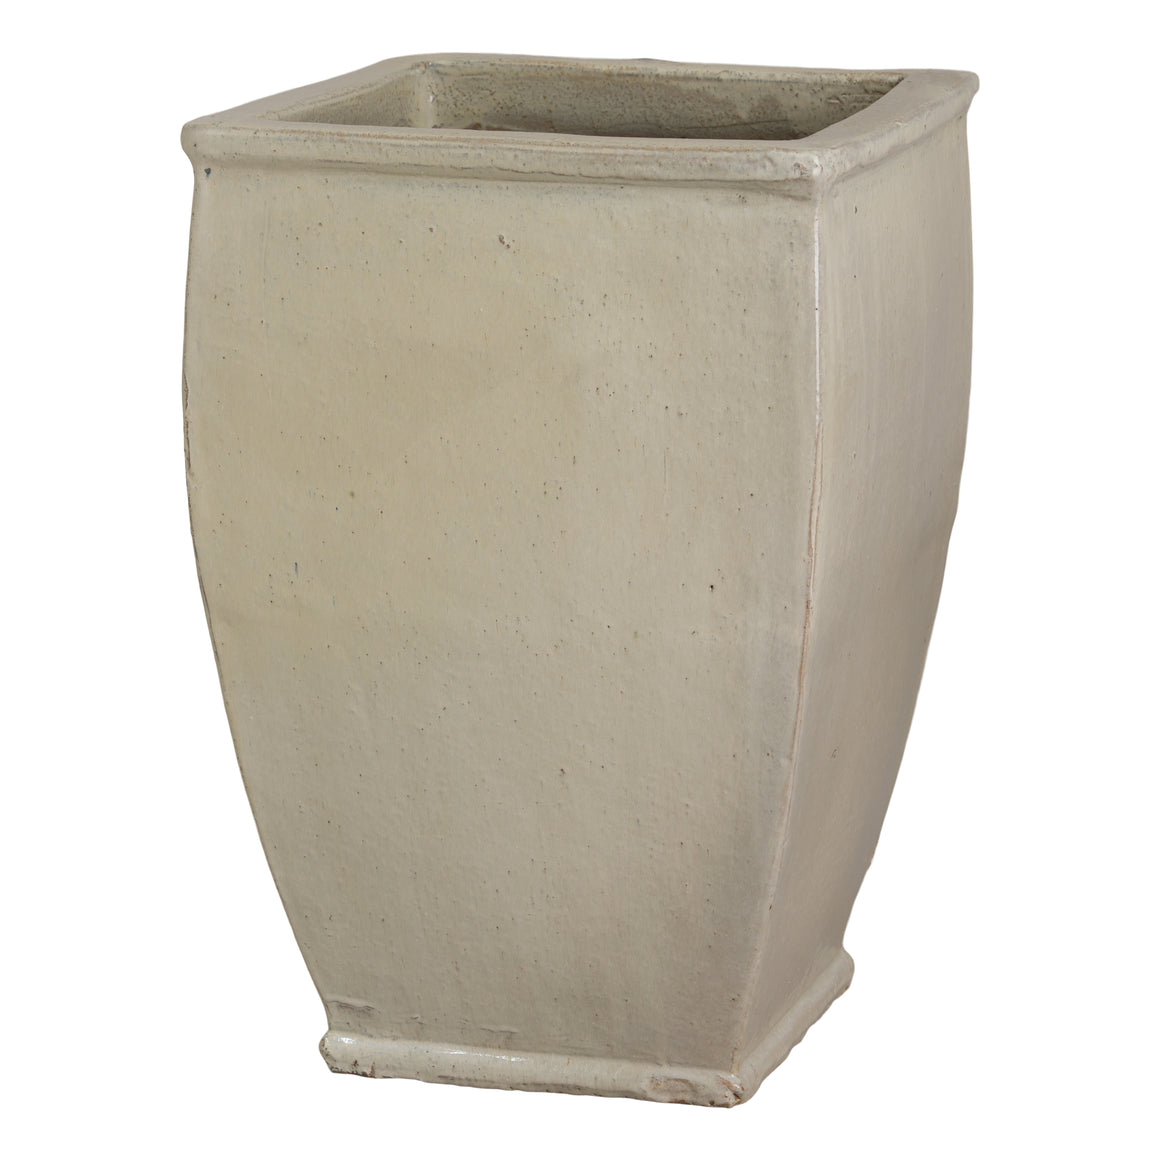 Large Square Planter with a Distressed White Glaze